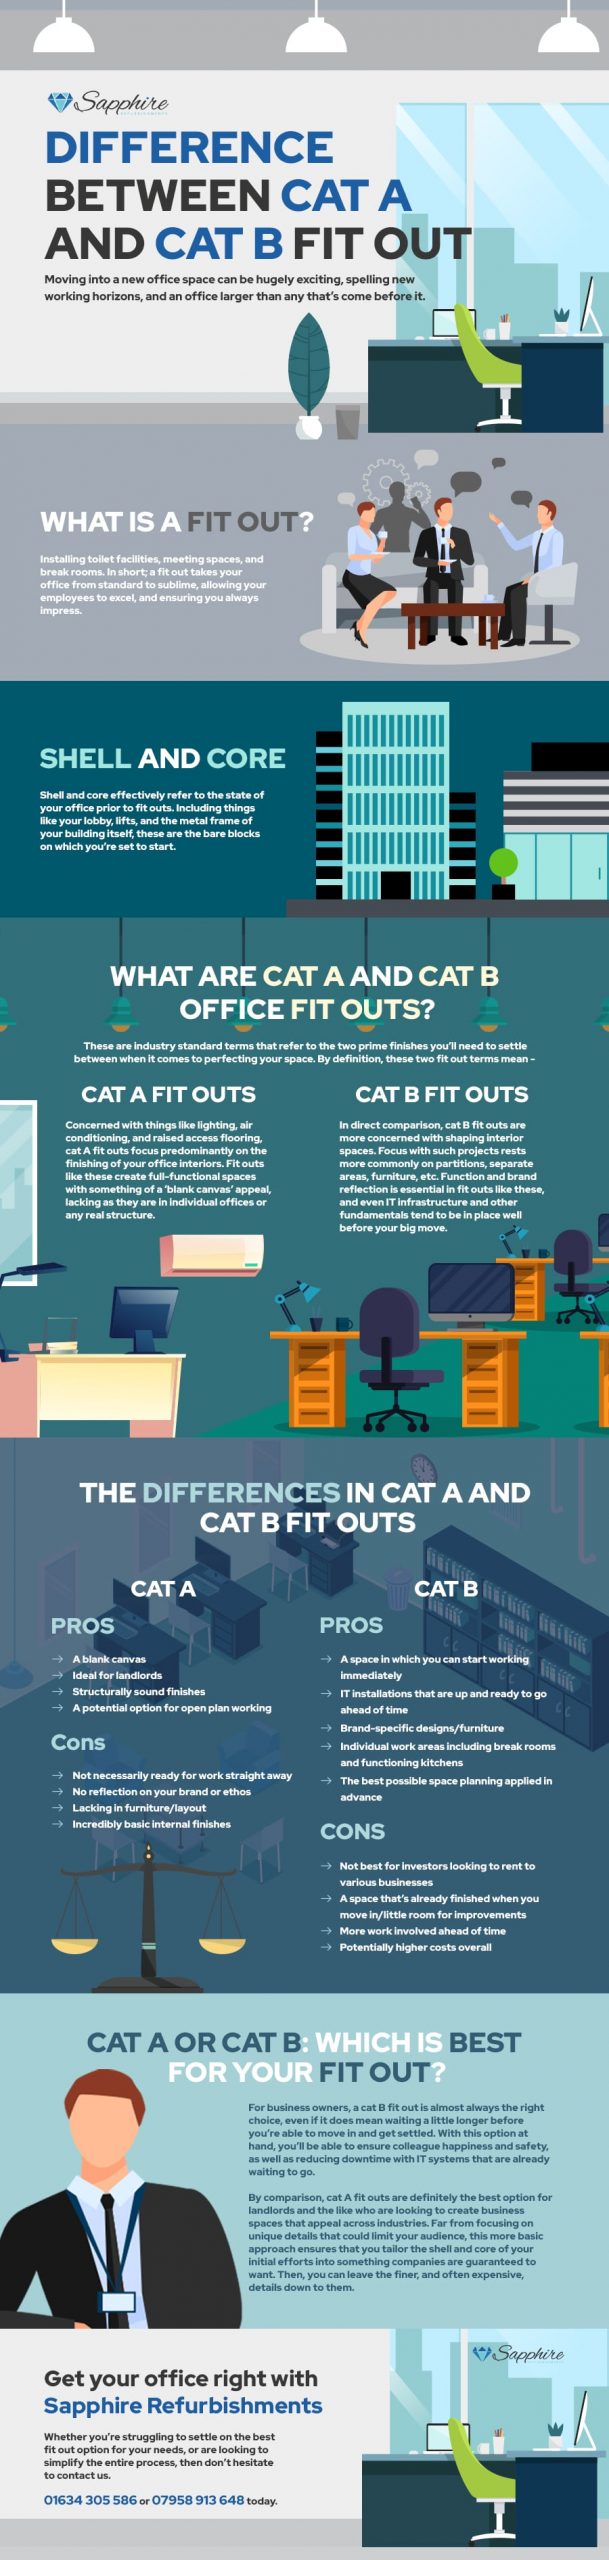 Difference Between Cat A and Cat B Fit out